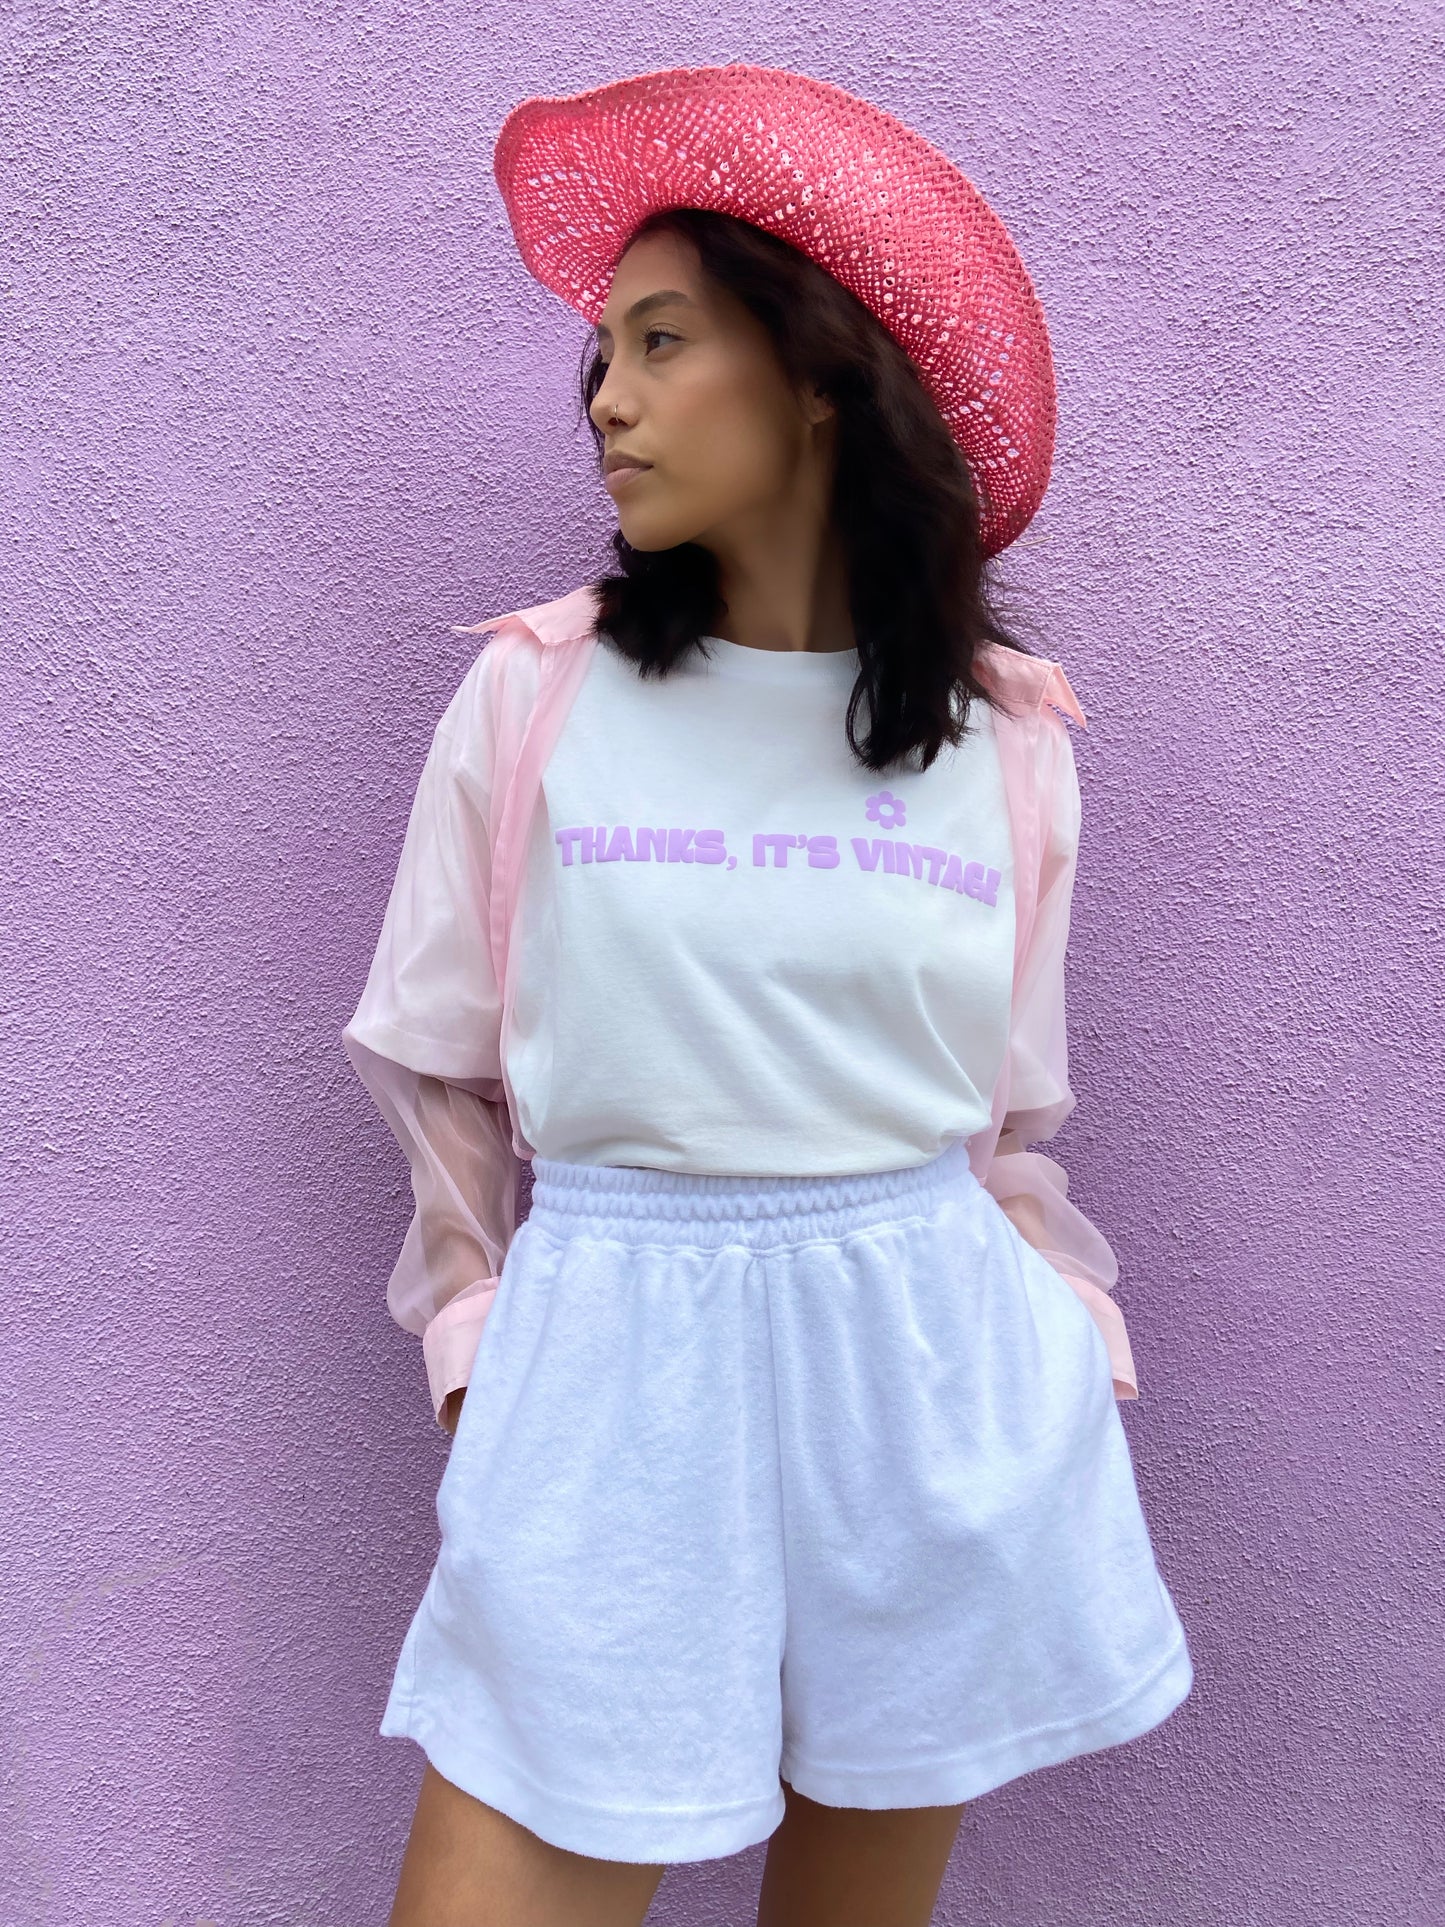 Thanks, It’s Vintage Tee - White/ Lilac - Large